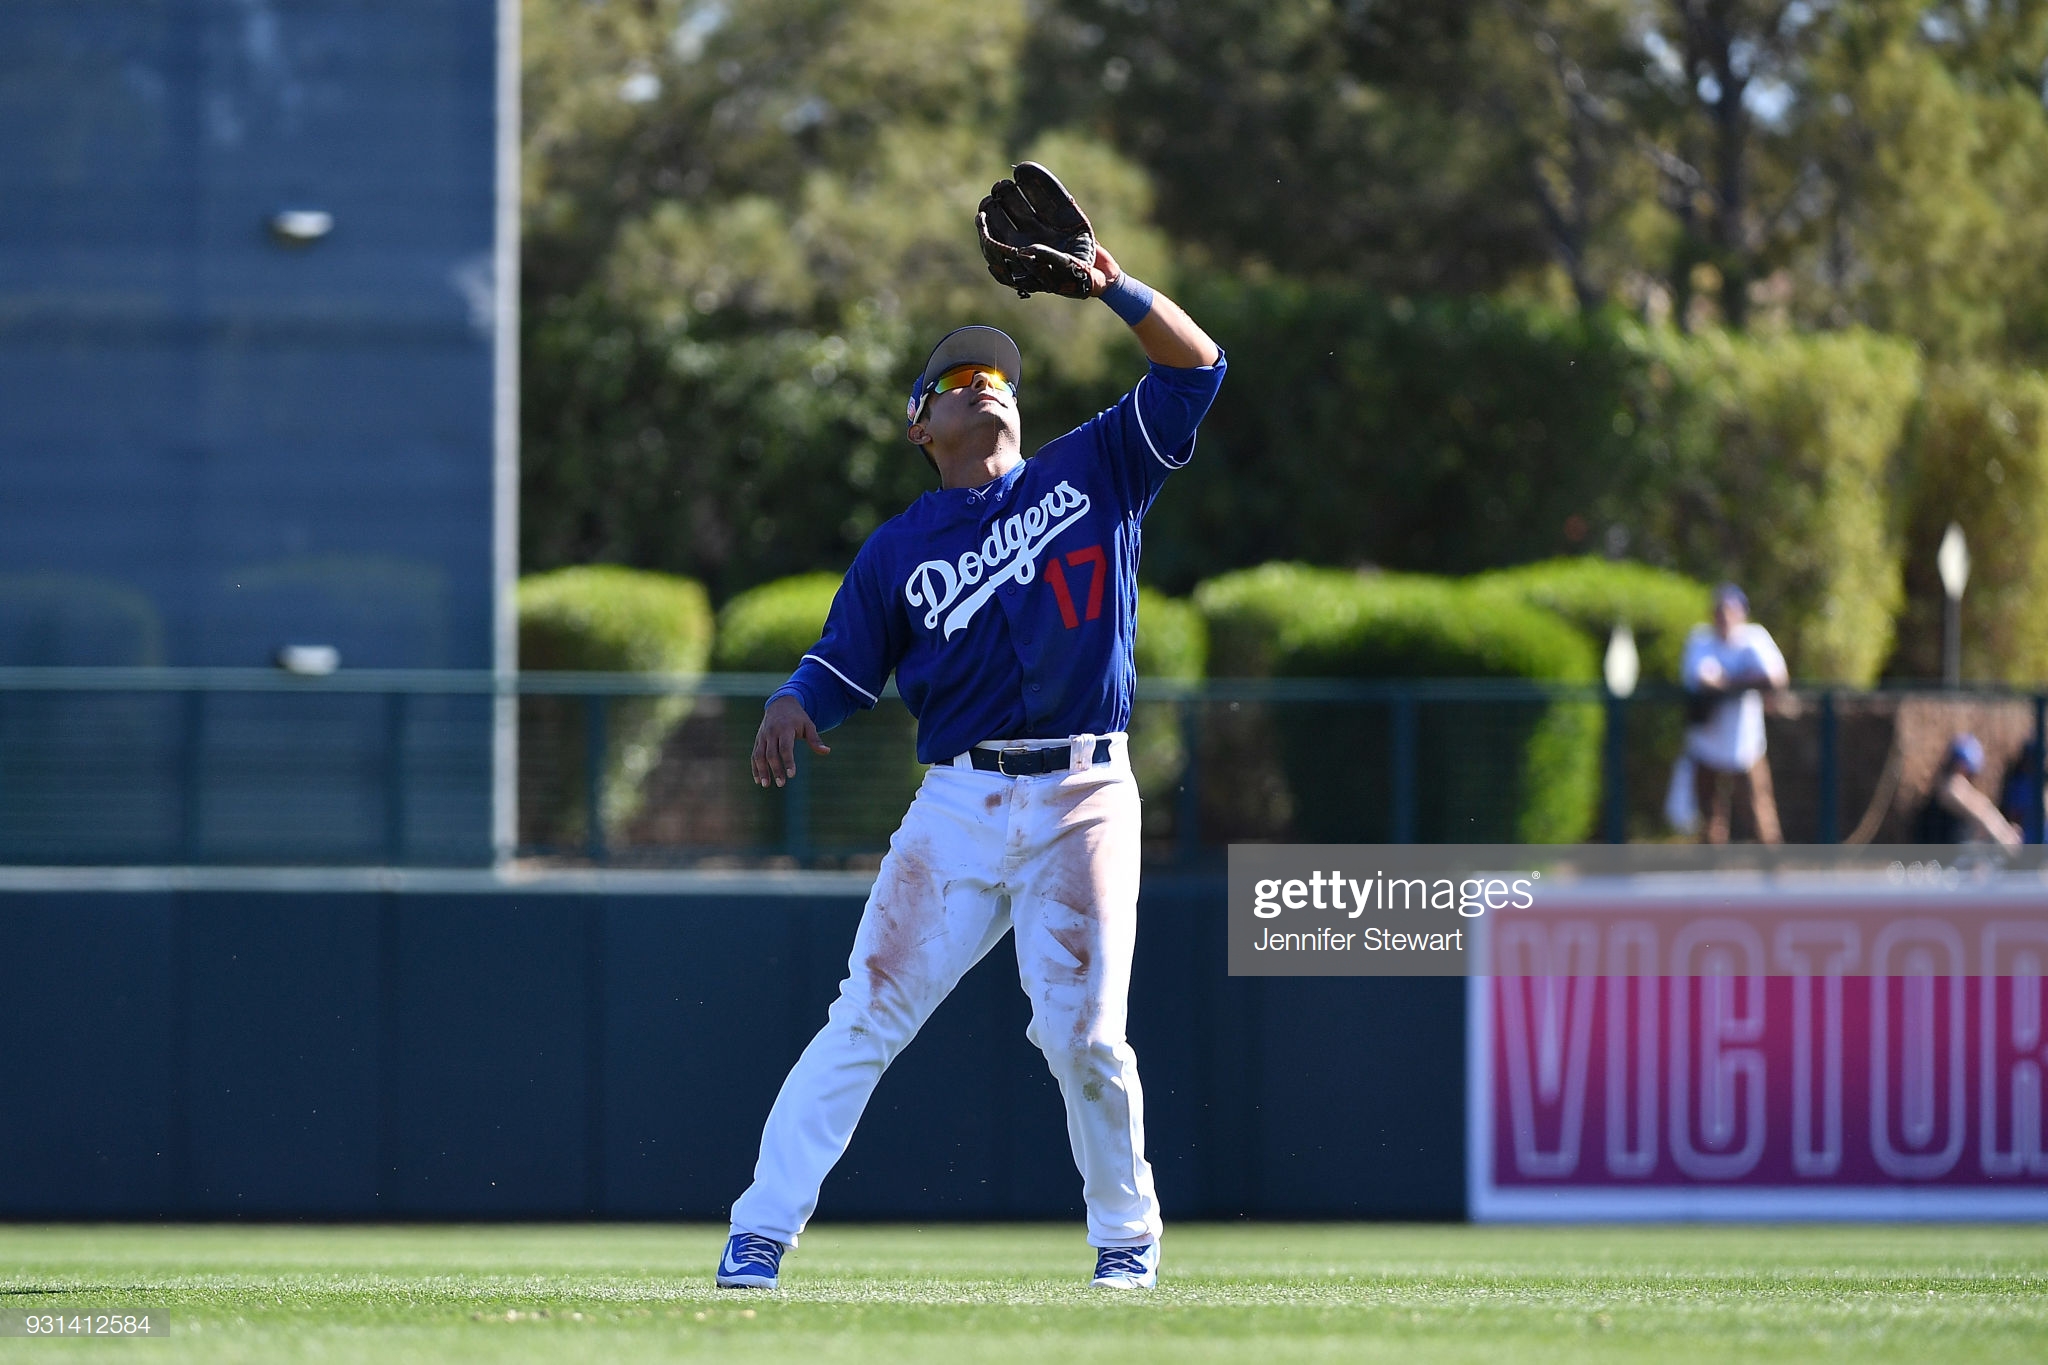 GLENDALE, AZ - MARCH 03: Donovan Solano #17 of the Los Angeles Dodgers catches a fly ball in a spring-training game against the Arizona Diamondbacks at Camelback Ranch on March 3, 2018 in Glendale, Arizona. (Photo by Jennifer Stewart/Getty Images)